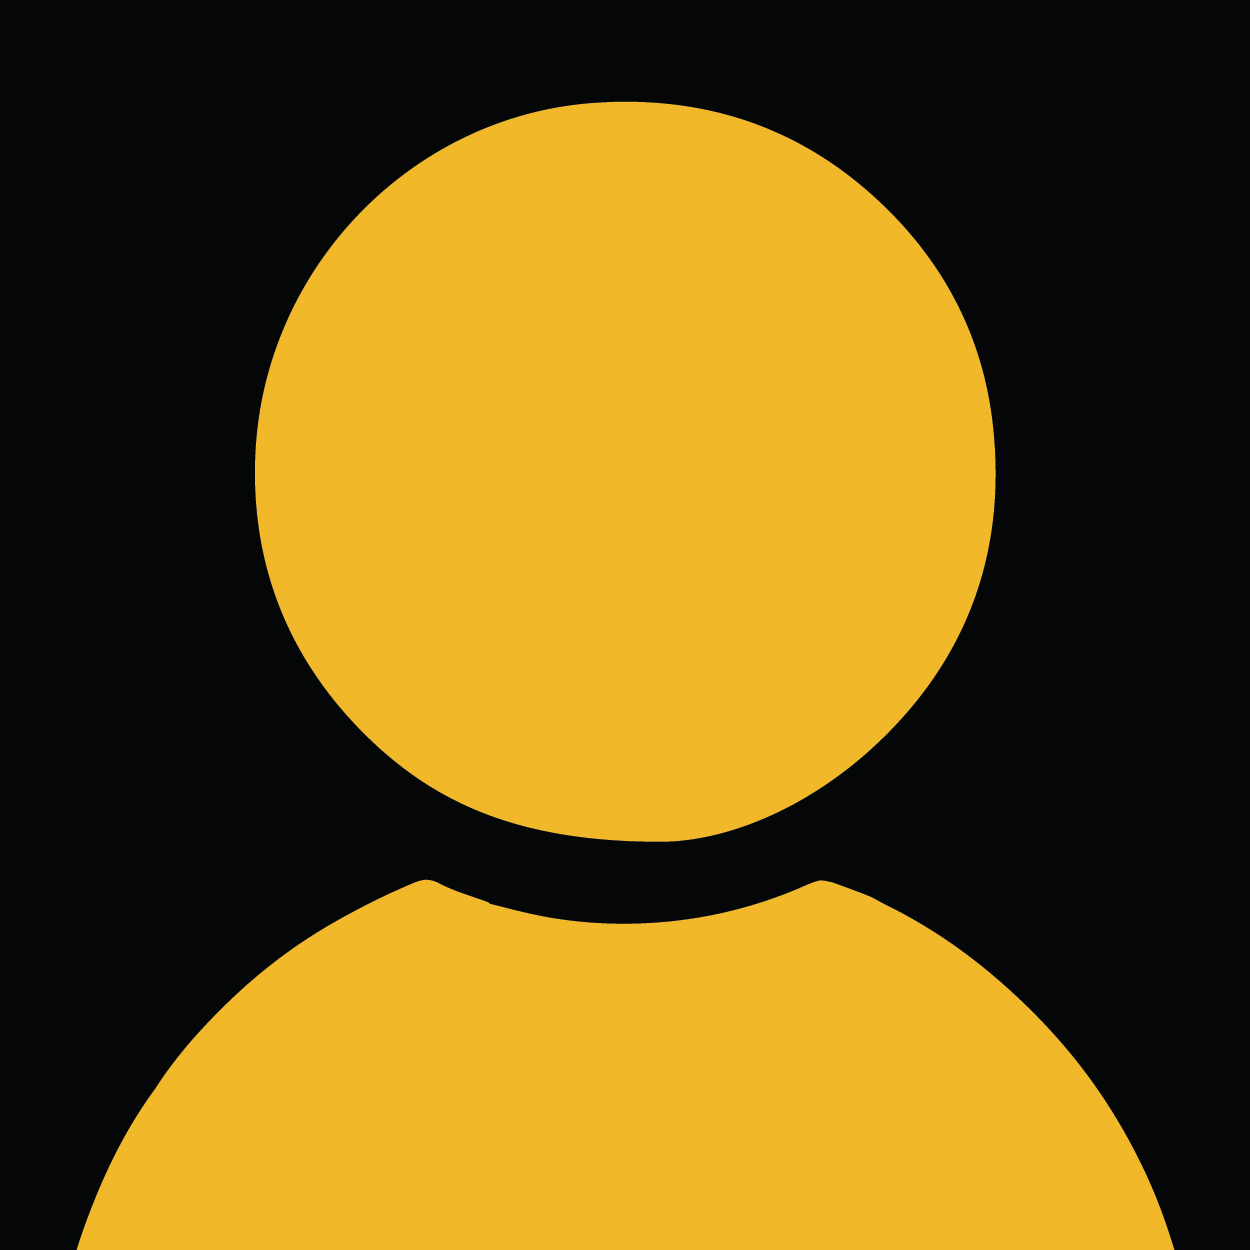 Yellow person icon on a black background